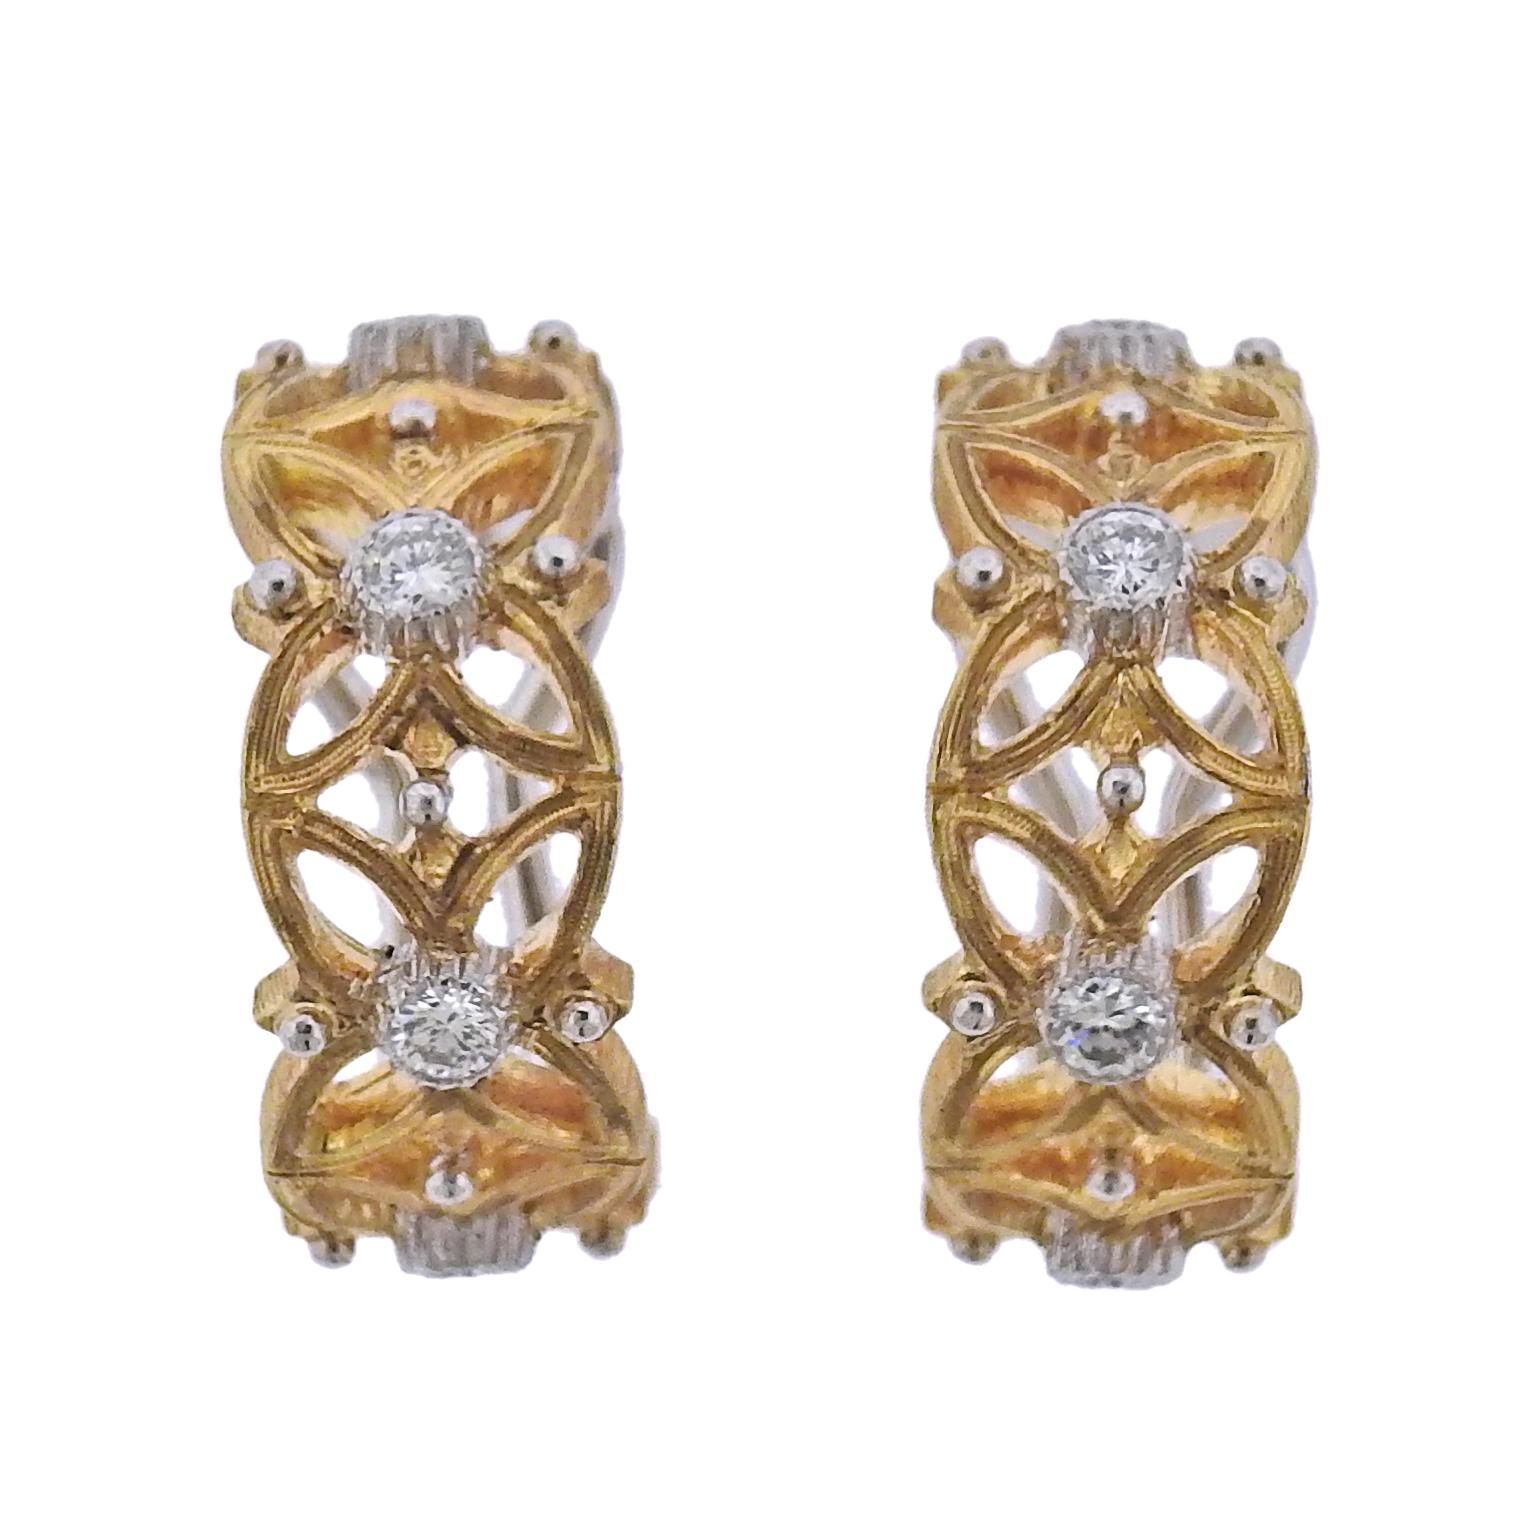 A pair of 18K yellow and white gold earrings set with approximately 0.48ctw of G/VS diamonds.  Crafted by Buccellati, the earrings are 19mm in diameter and 8mm wide.  The weight of the earrings is 11.8 grams.  Marked: Buccellati, 750.  Come with